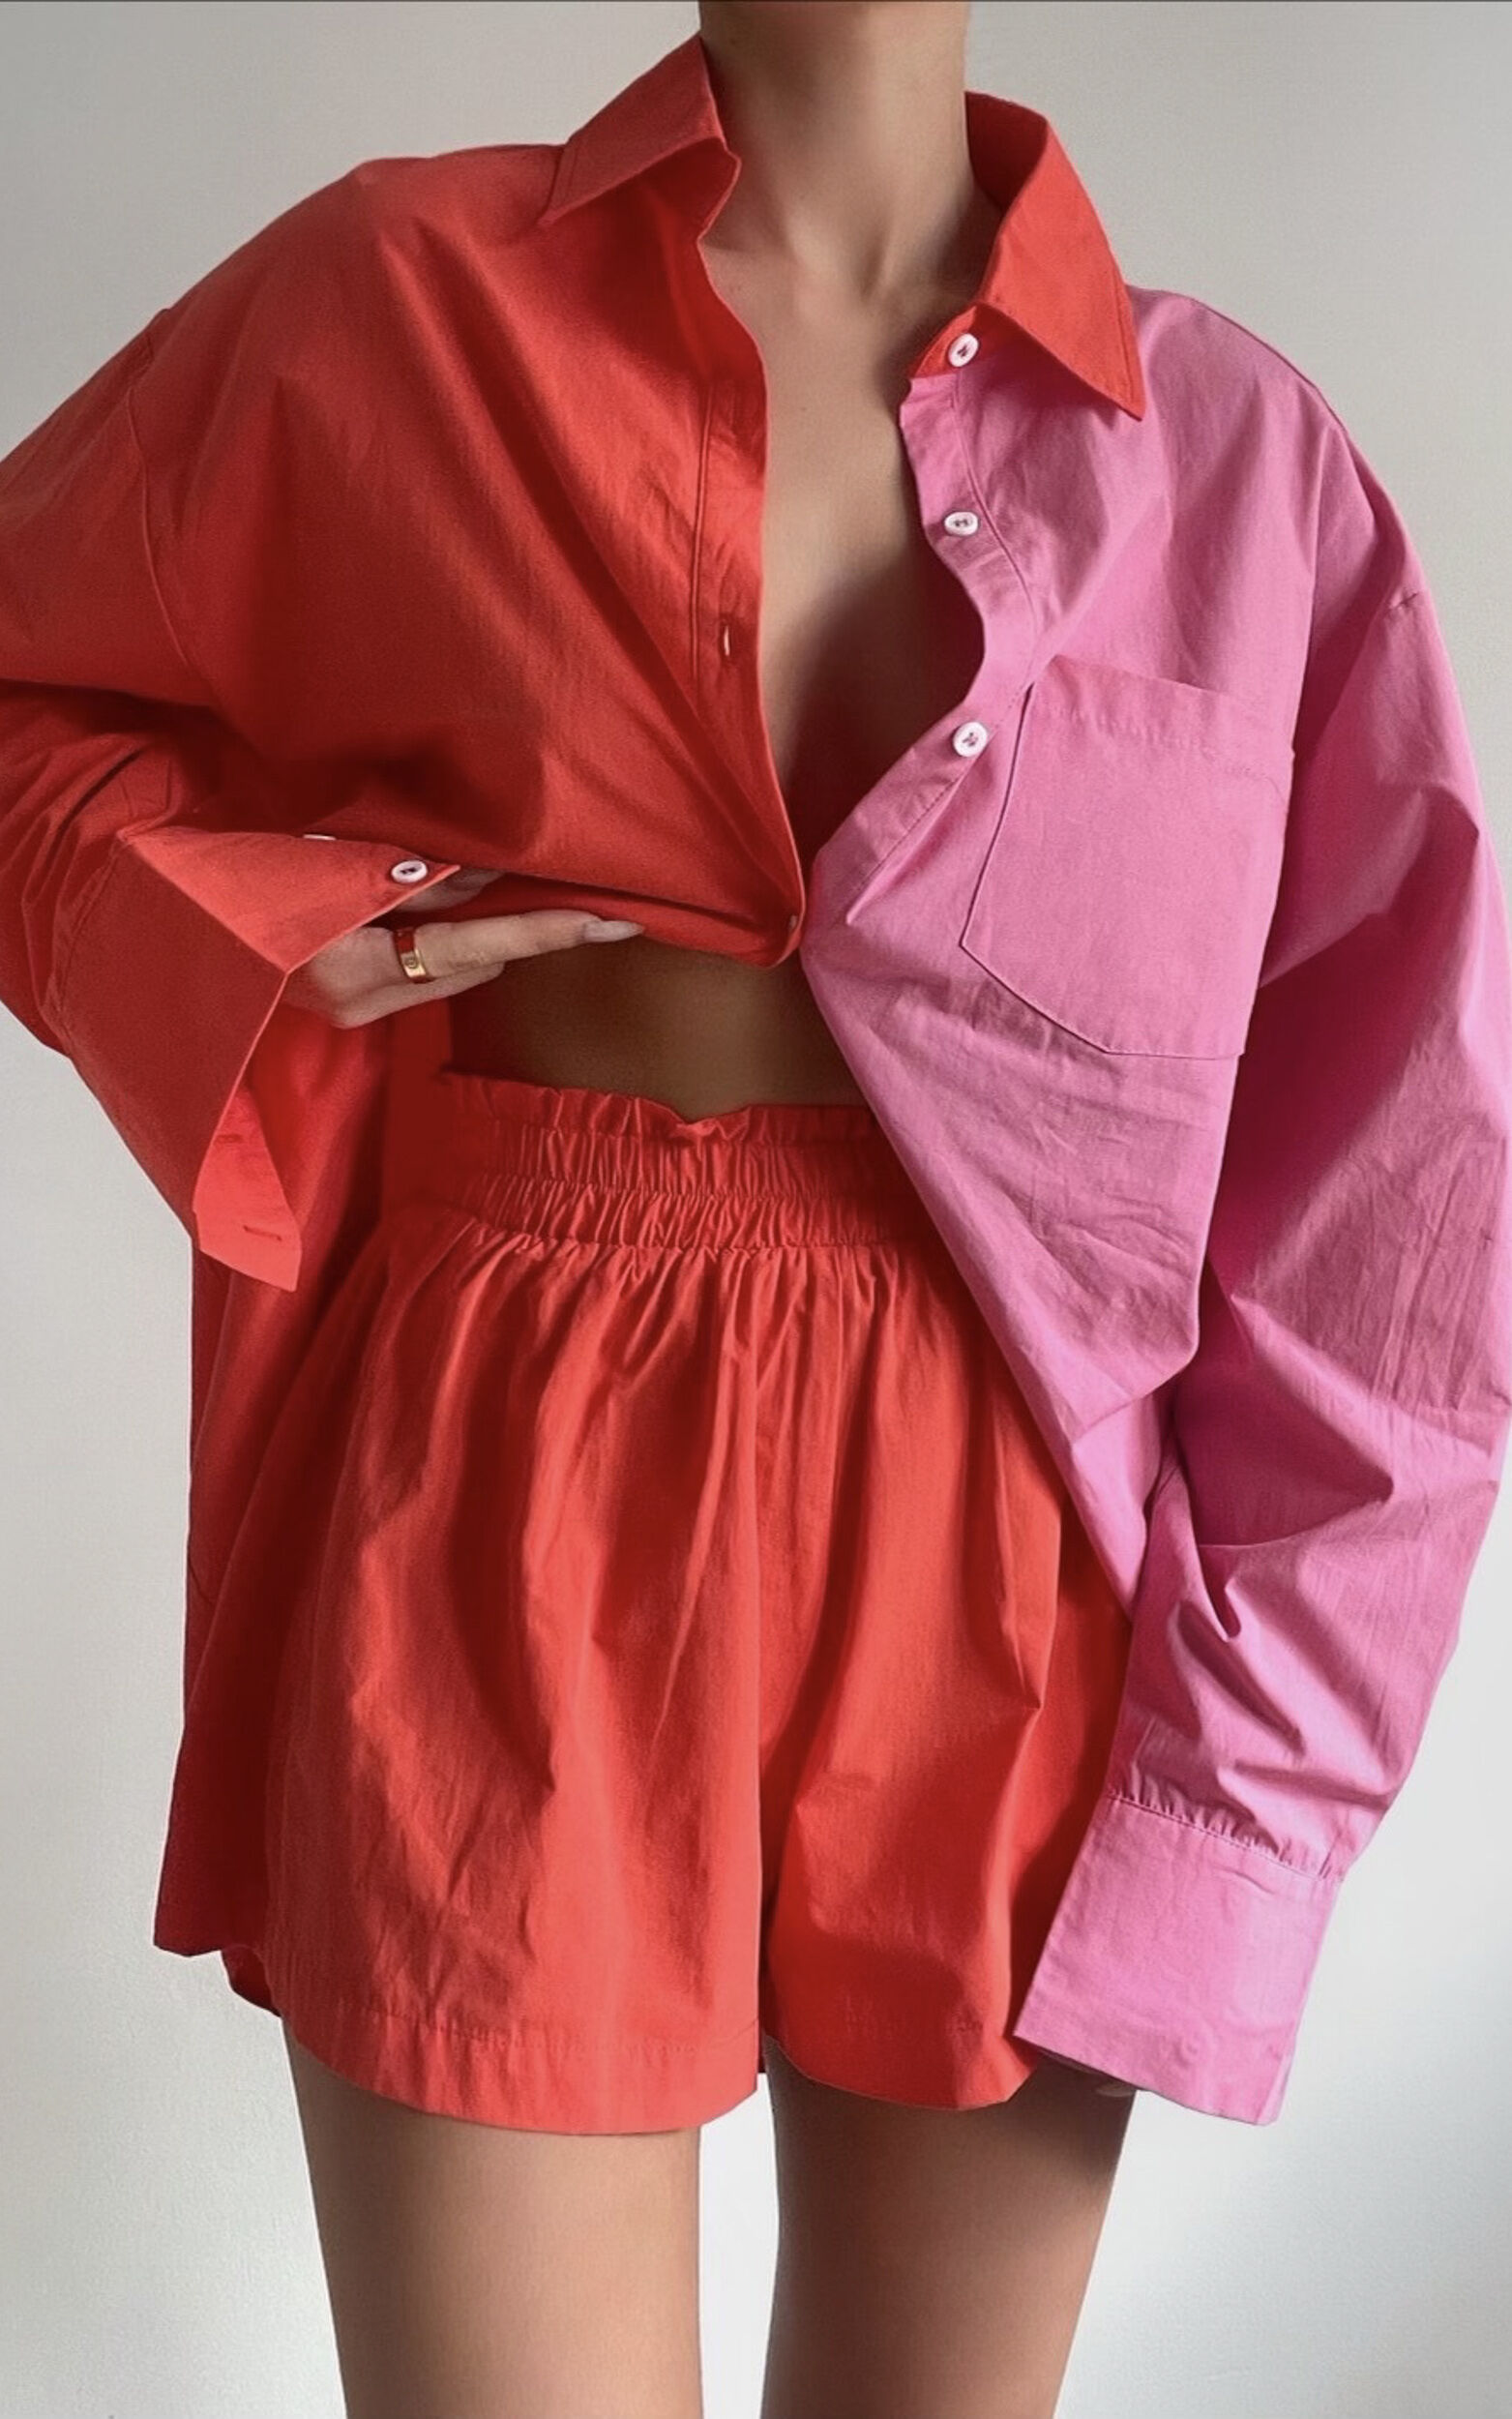 Roewe Colour Block Oversized Button Up Shirt in Oxy Fire & Pink - 04, RED2, super-hi-res image number null